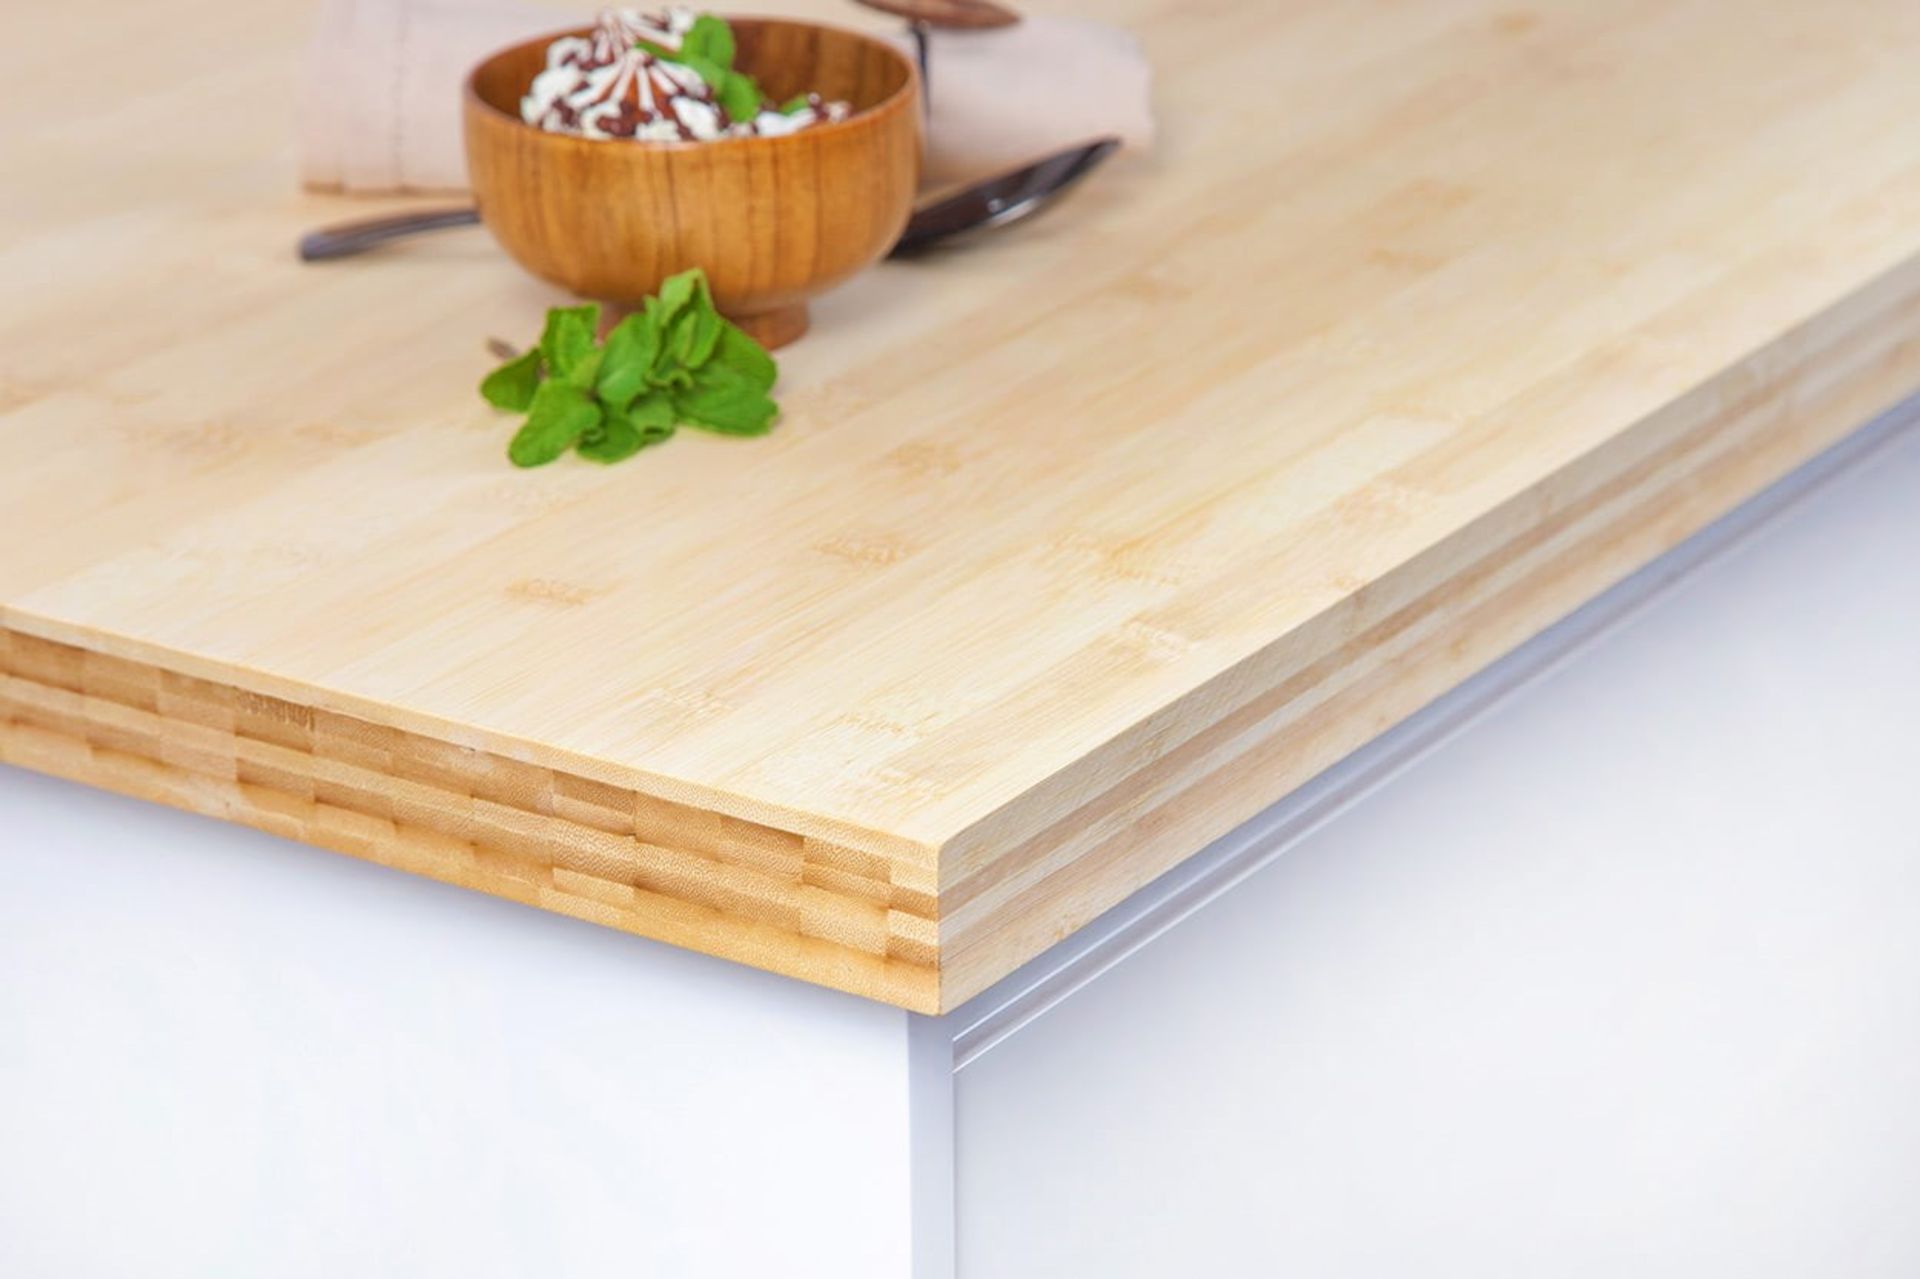 1 x Layered Solid Bamboo Wood Worktop - Size: 3000 x 900 x 40mm - Ideal For Kitchens, Countertops, - Image 5 of 5